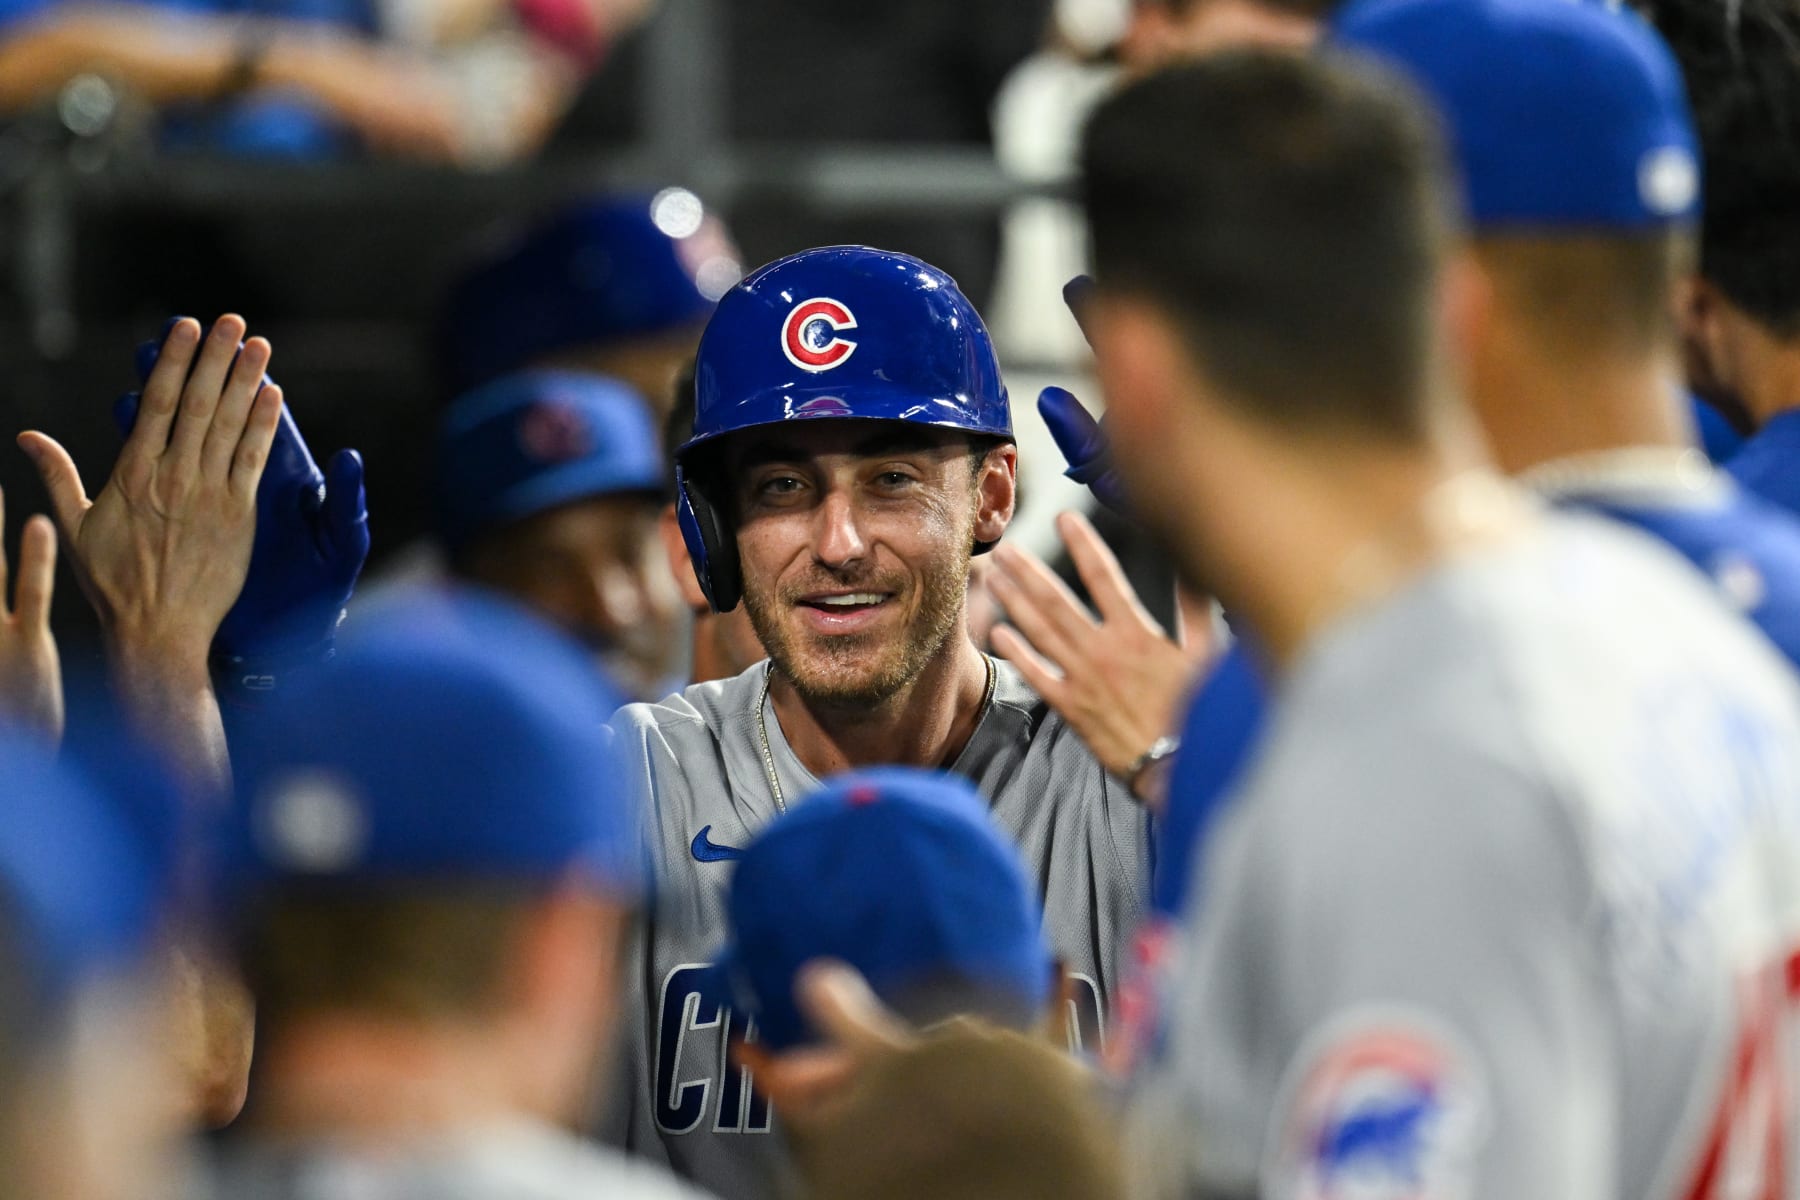 Cubs: Cody Bellinger is putting up come-and-get-me numbers